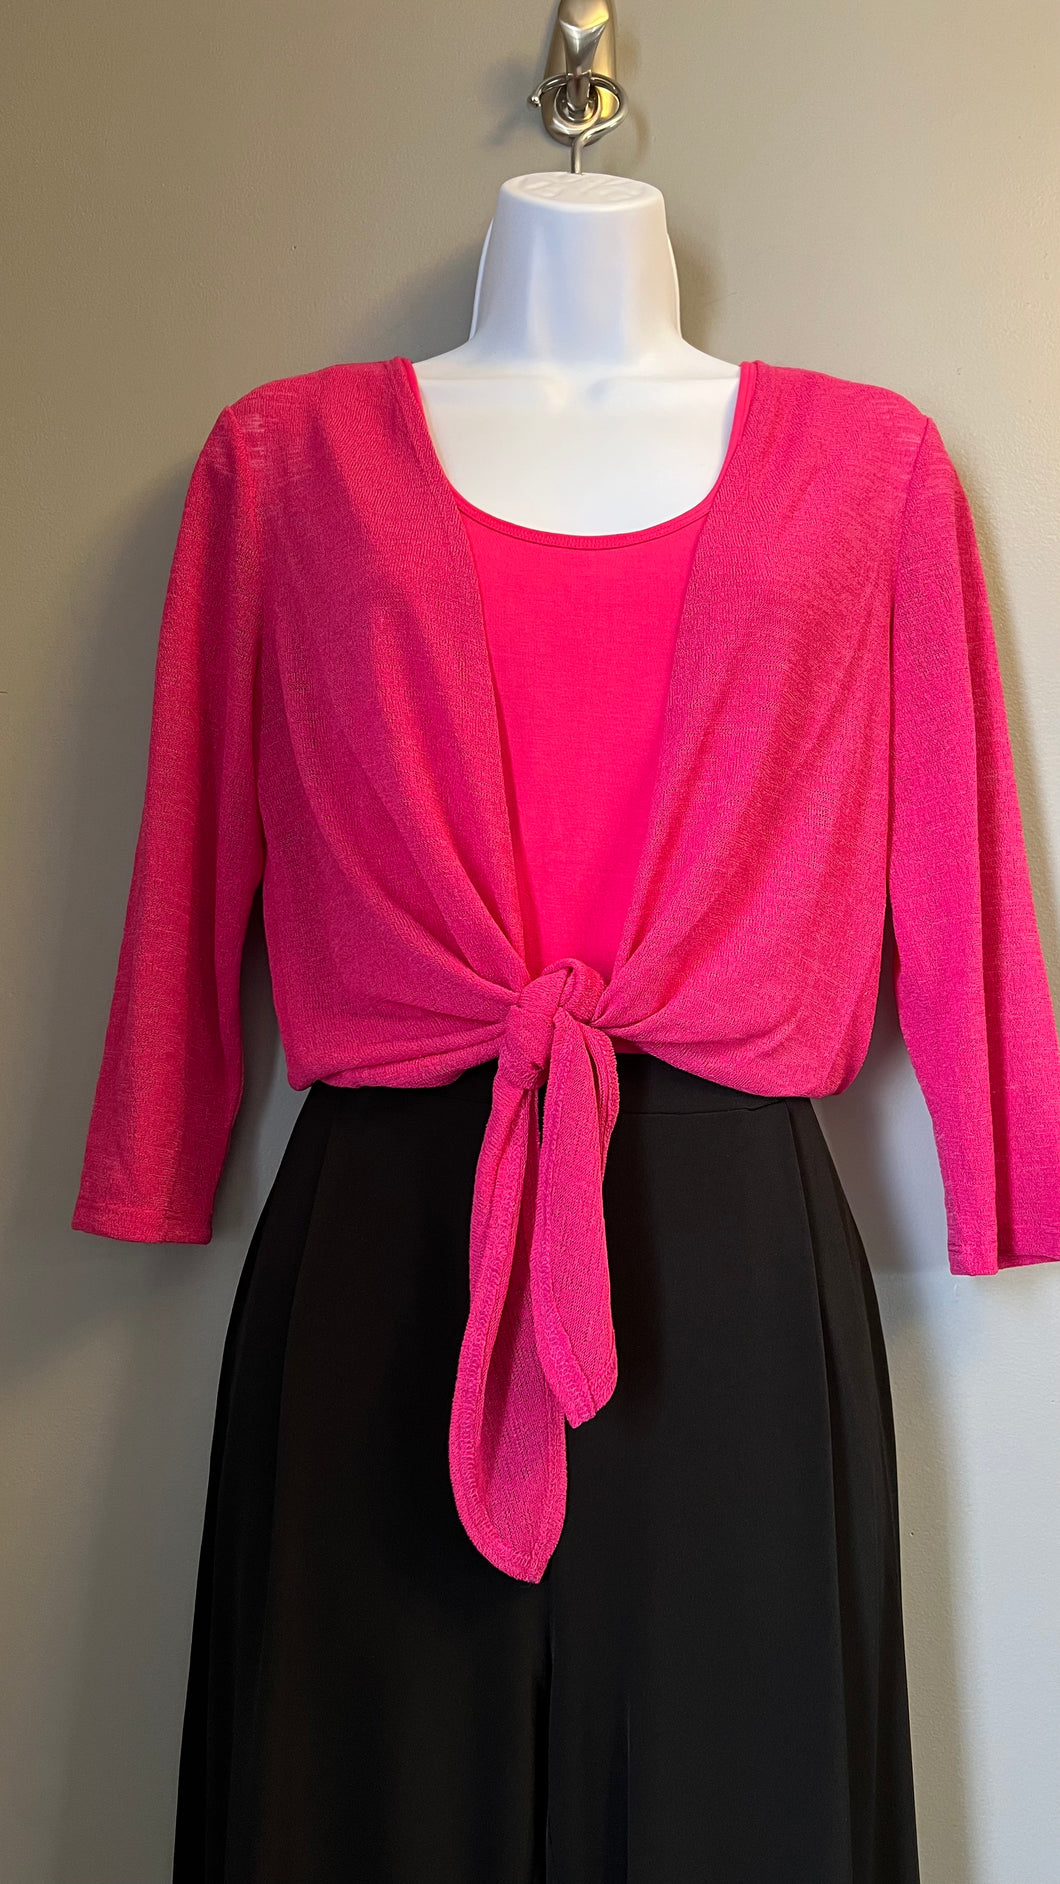 Soft Works Knit 3/4 Sleeve Tie Shrug available in Fuchsia, White or Black